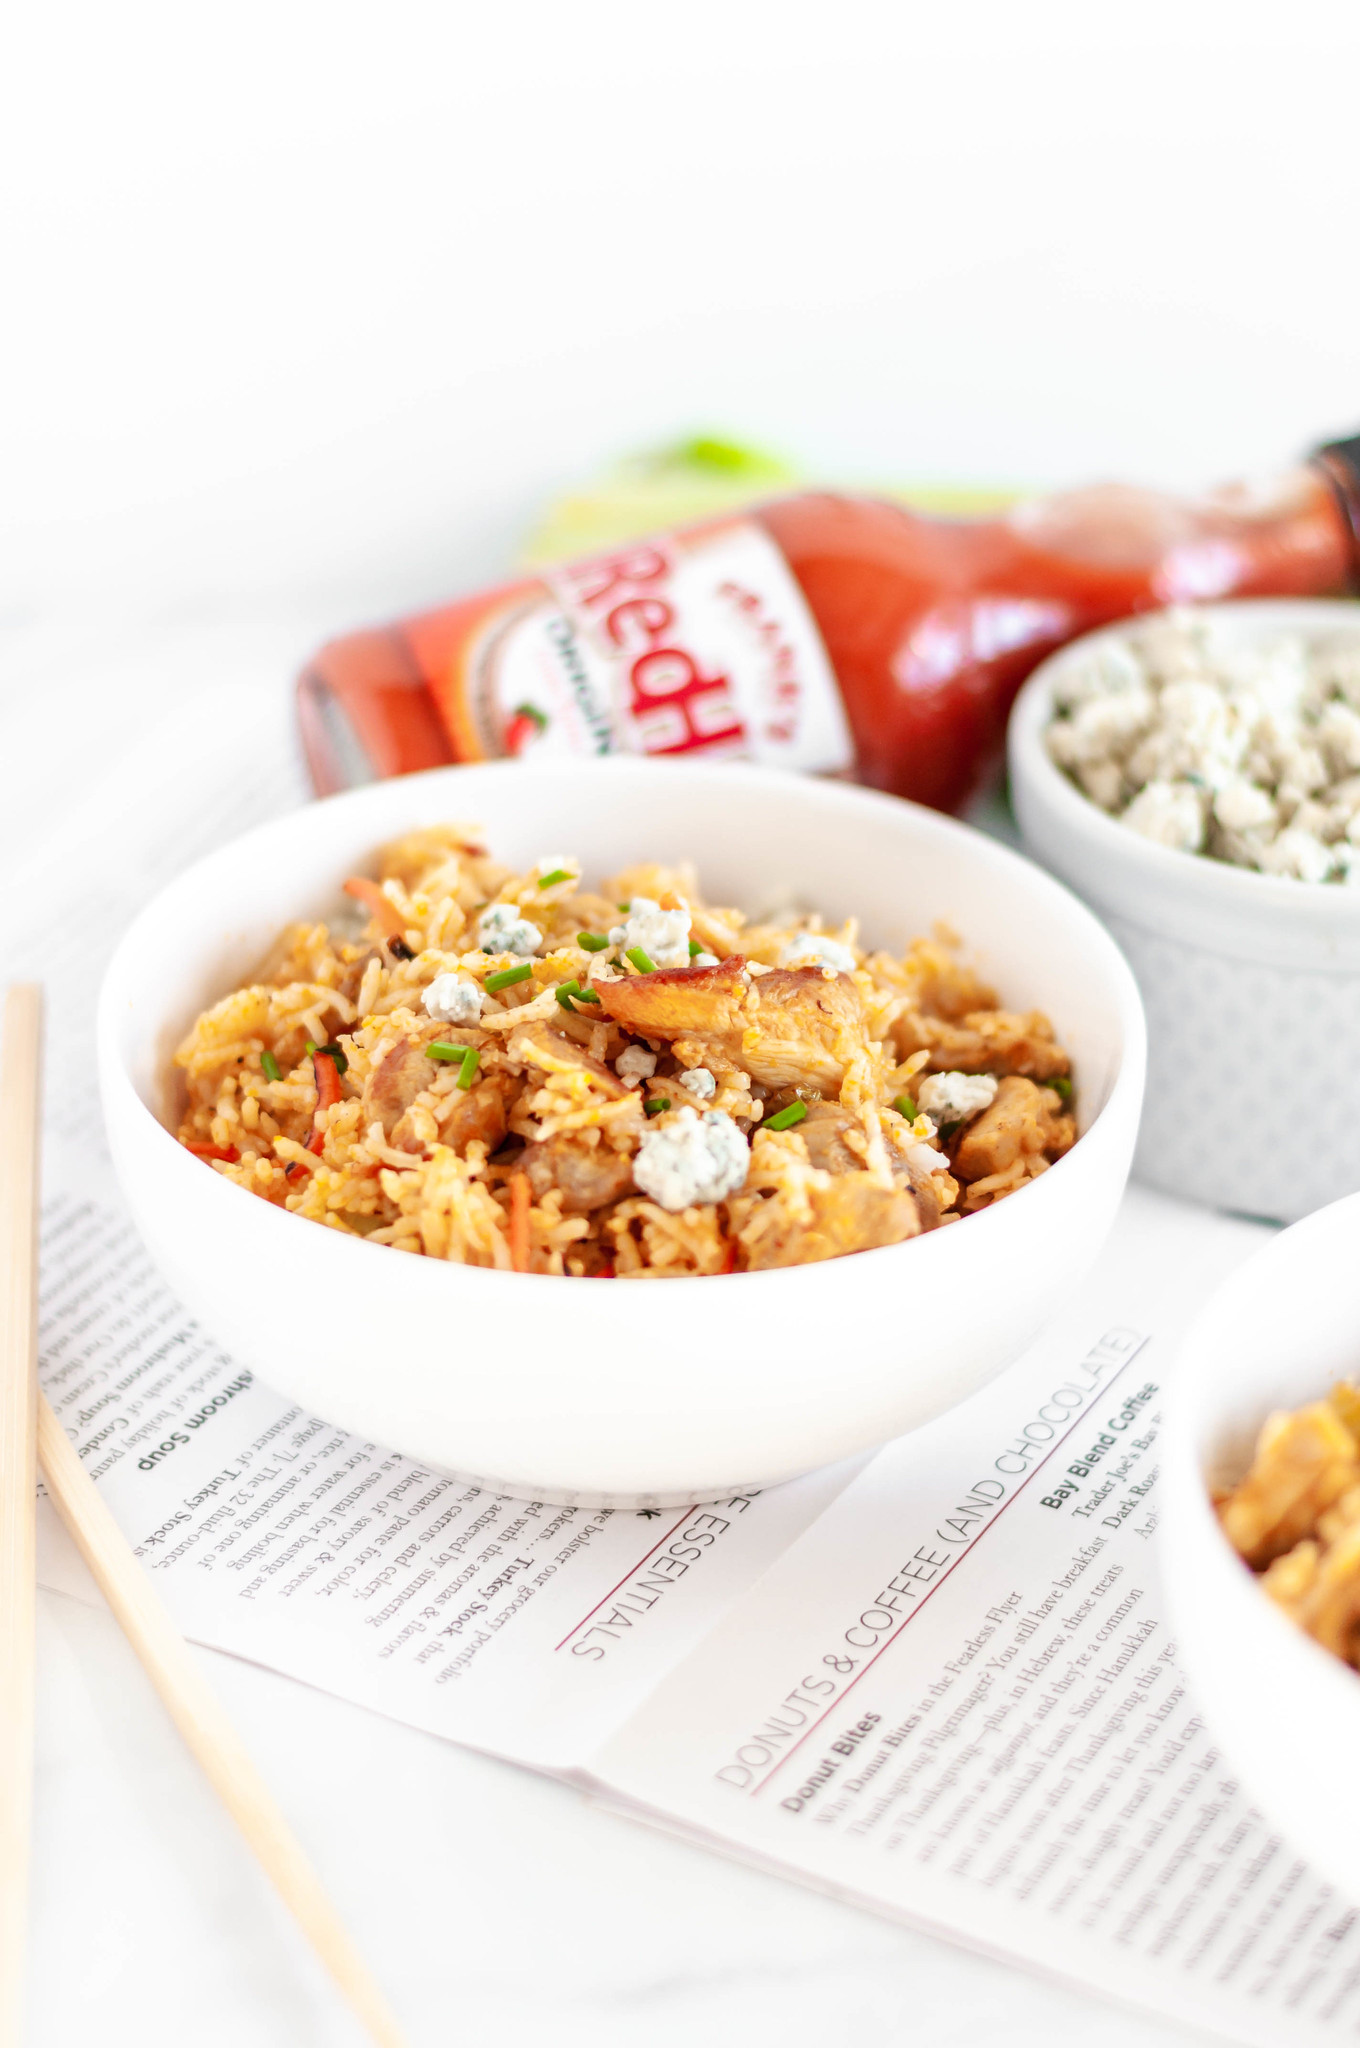 Buffalo Fried Rice is a super simple, flavorful and spicy dinner you can whip up in less than 30 minutes with some leftover rice. Spicy buffalo chicken, carrots, celery and buffalo sauce with a sprinkle of crumbled blue cheese.